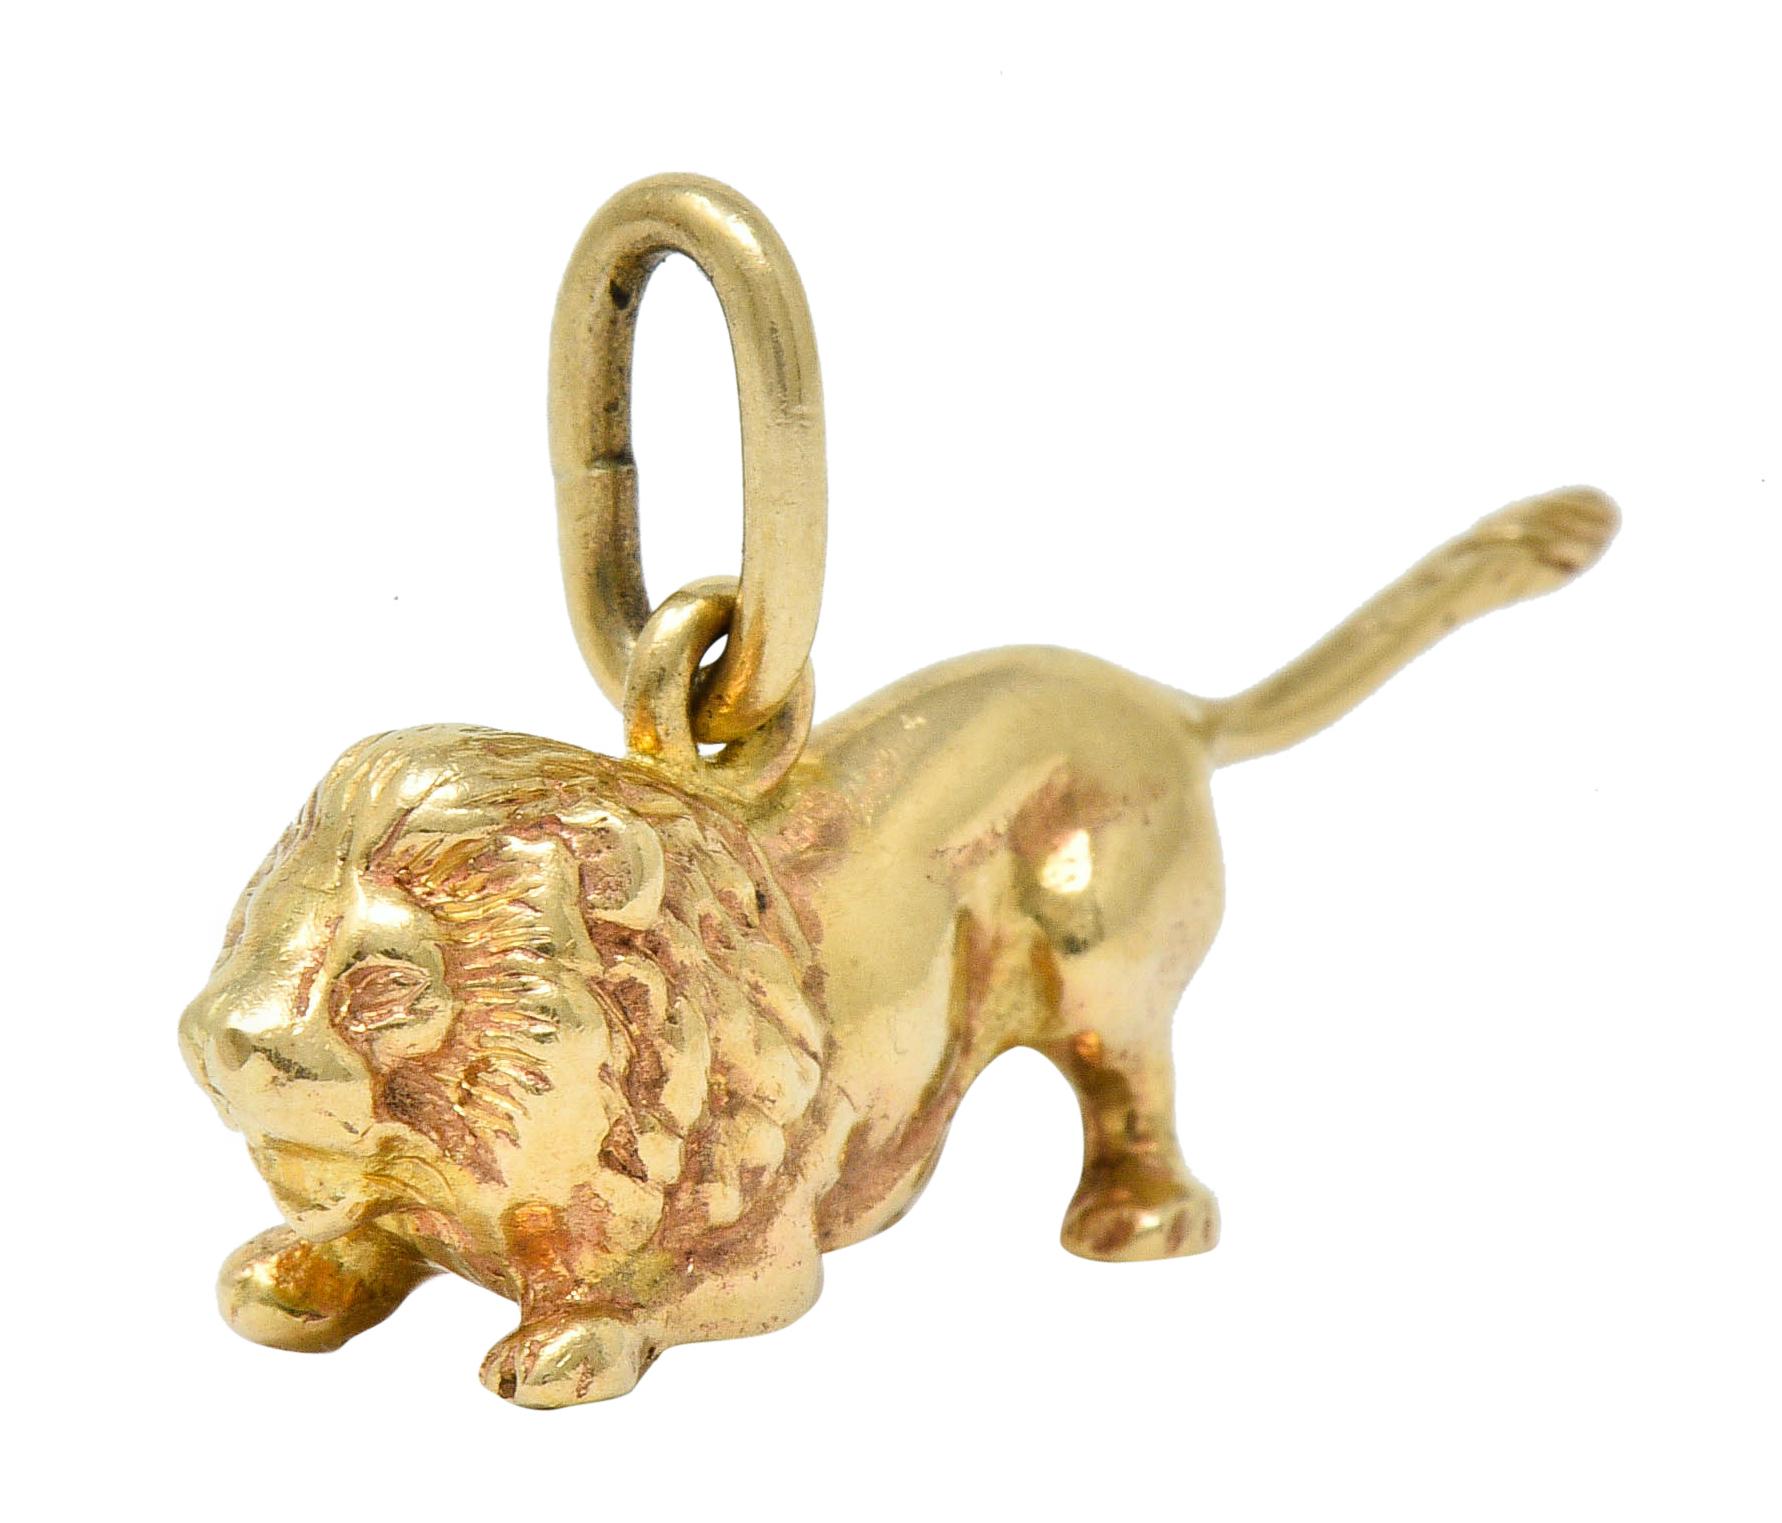 Designed as a crouching lion with an erect tail and a roaring countenance

With highly rendered details and a bright polish

Stamped 14K for 14 karat gold

Fully signed Tiffany & Co.

Circa: 1940s

Measures: 5/8 x 1 1/8 inches

Total weight: 4.3